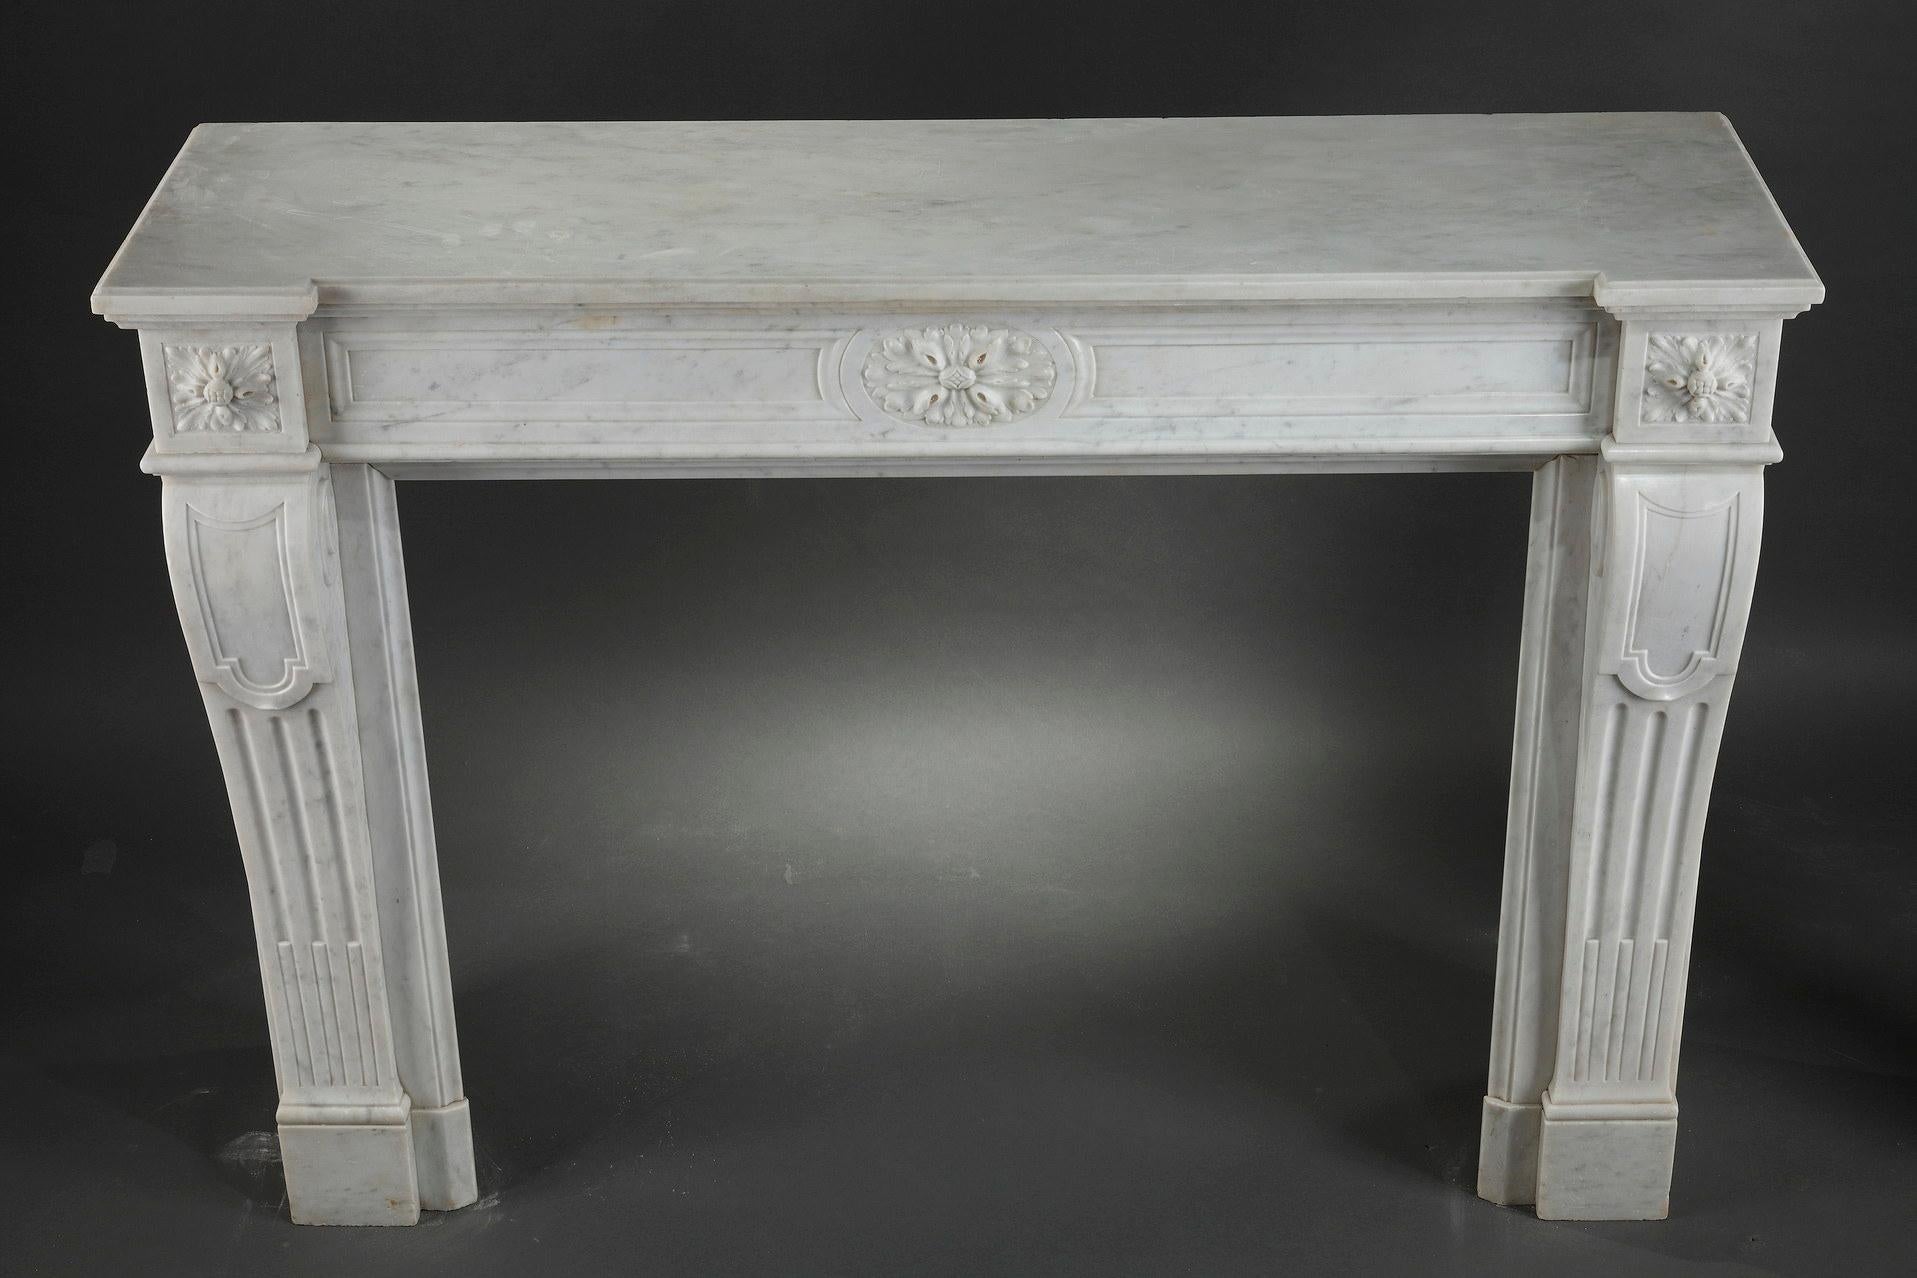 Beautiful Louis XVI-inspired chimney mantelpiece, made in white 